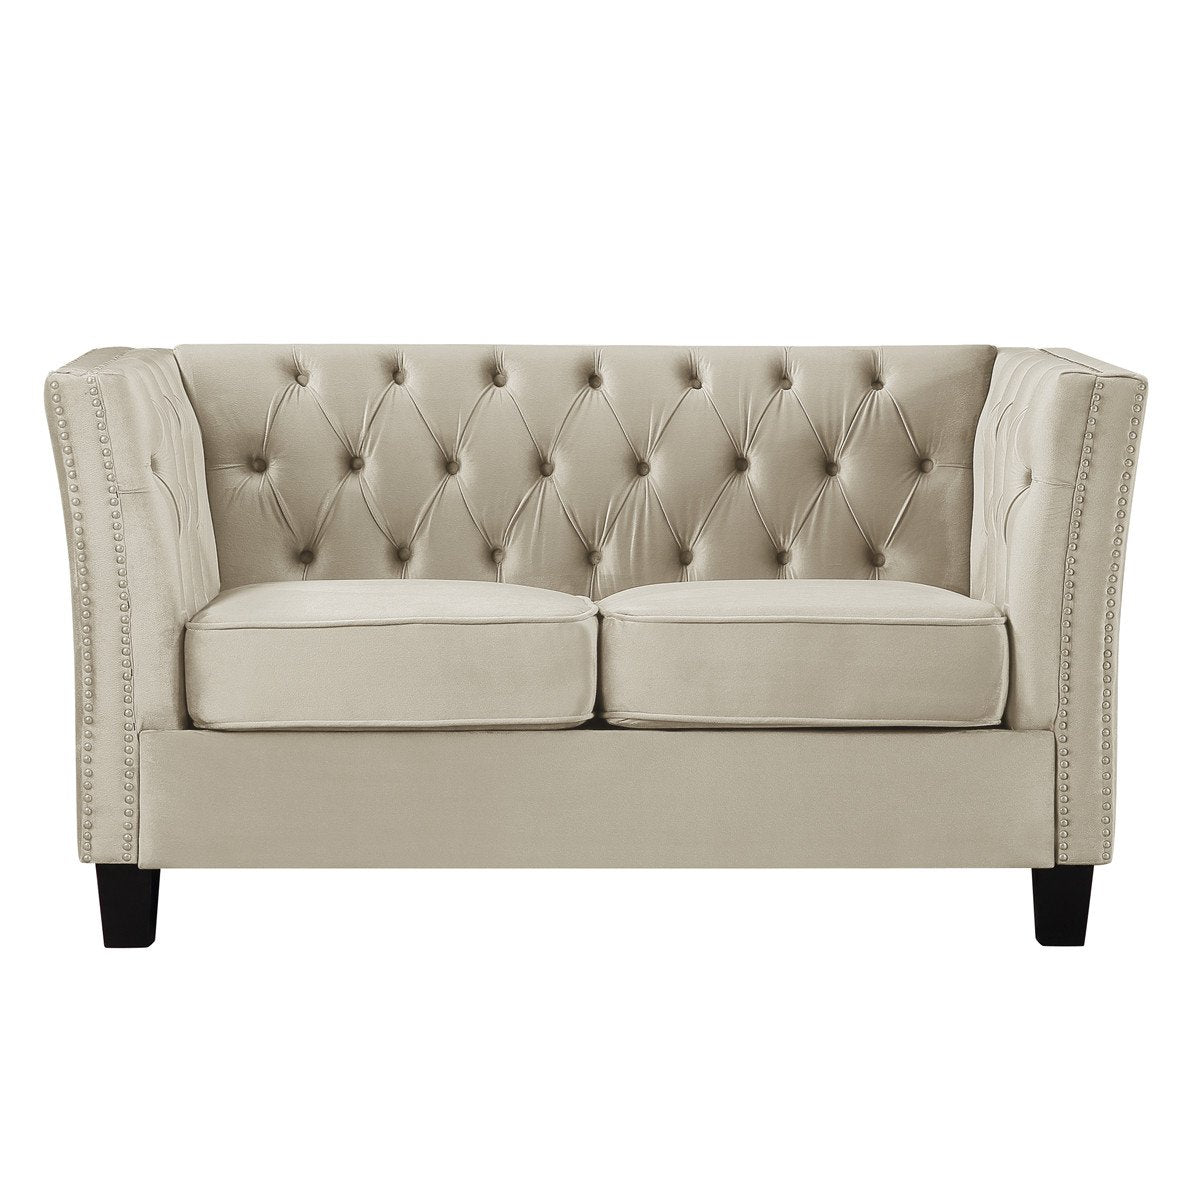 Tufted Living Room Sofa Set with Nailheads